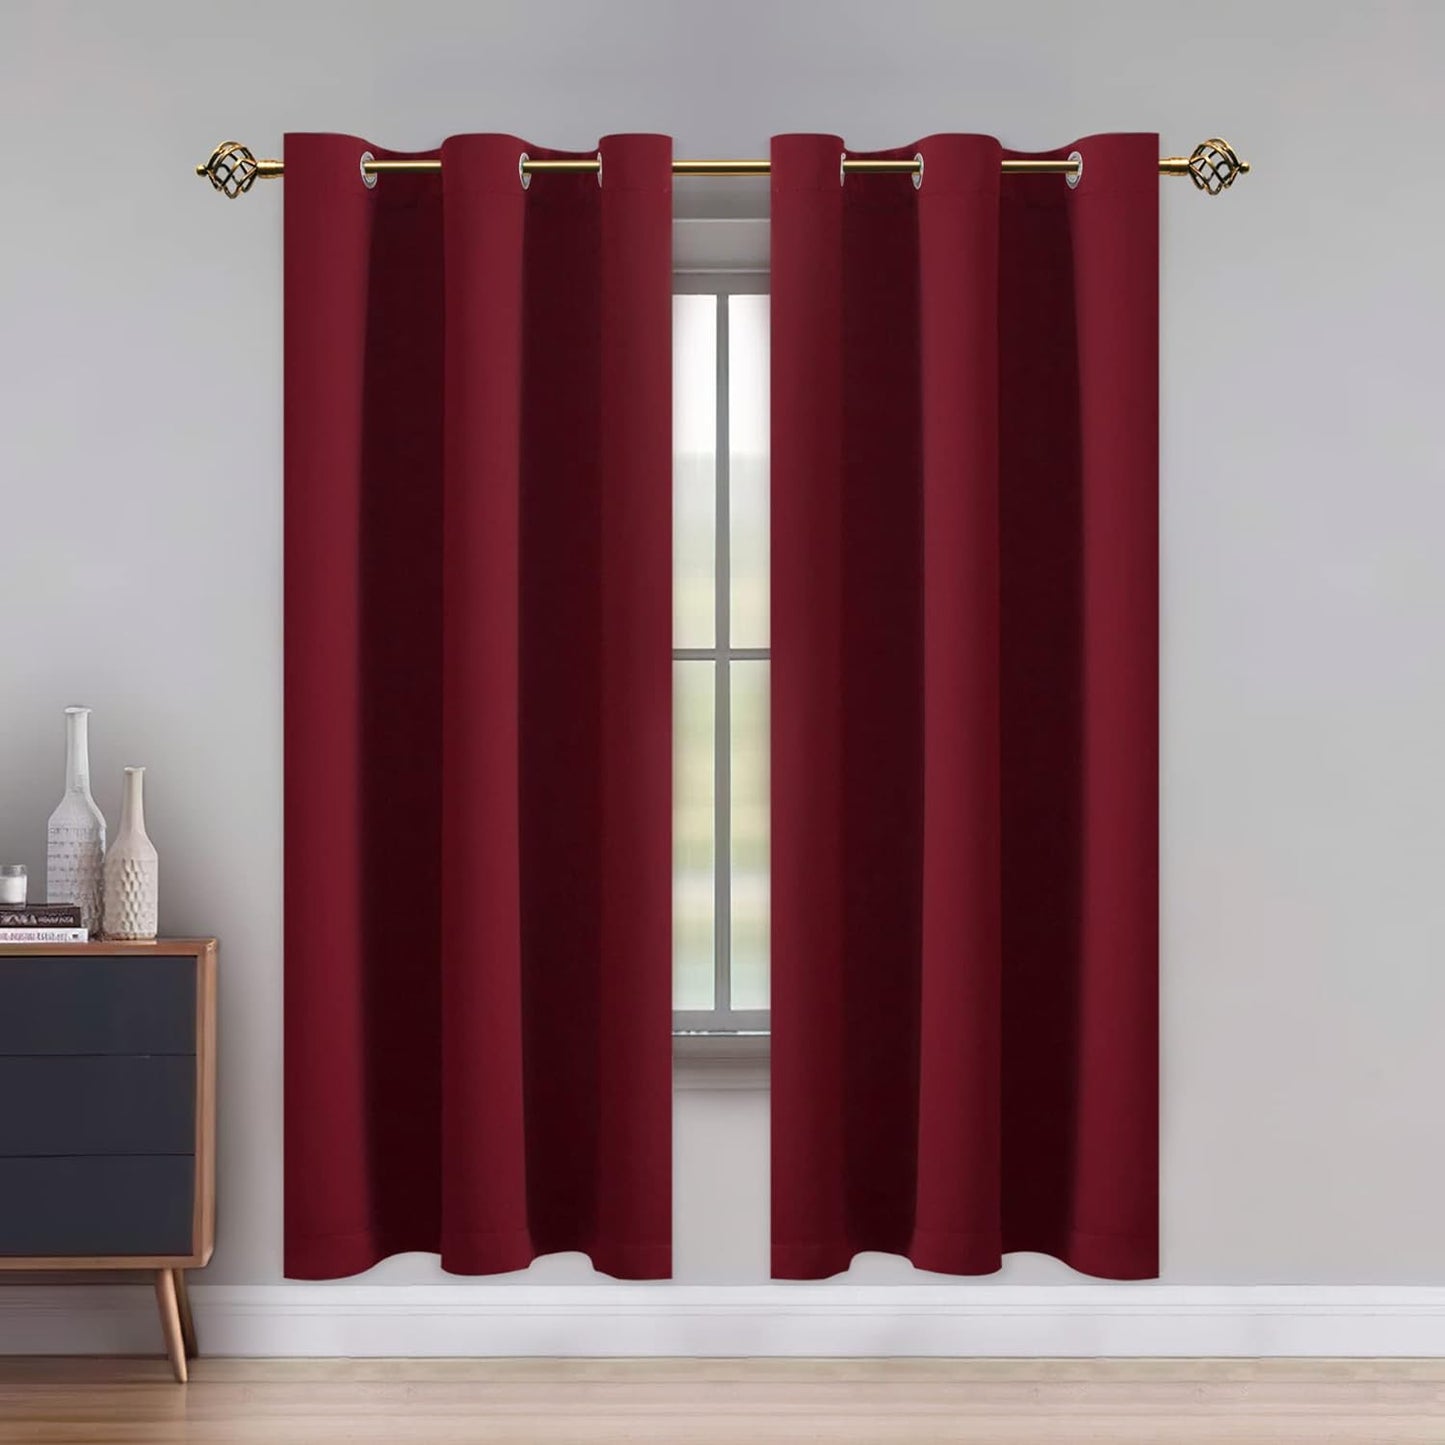 LUSHLEAF Blackout Curtains for Bedroom, Solid Thermal Insulated with Grommet Noise Reduction Window Drapes, Room Darkening Curtains for Living Room, 2 Panels, 52 X 63 Inch Grey  SHEEROOM Burgundy 42 X 84 Inch 